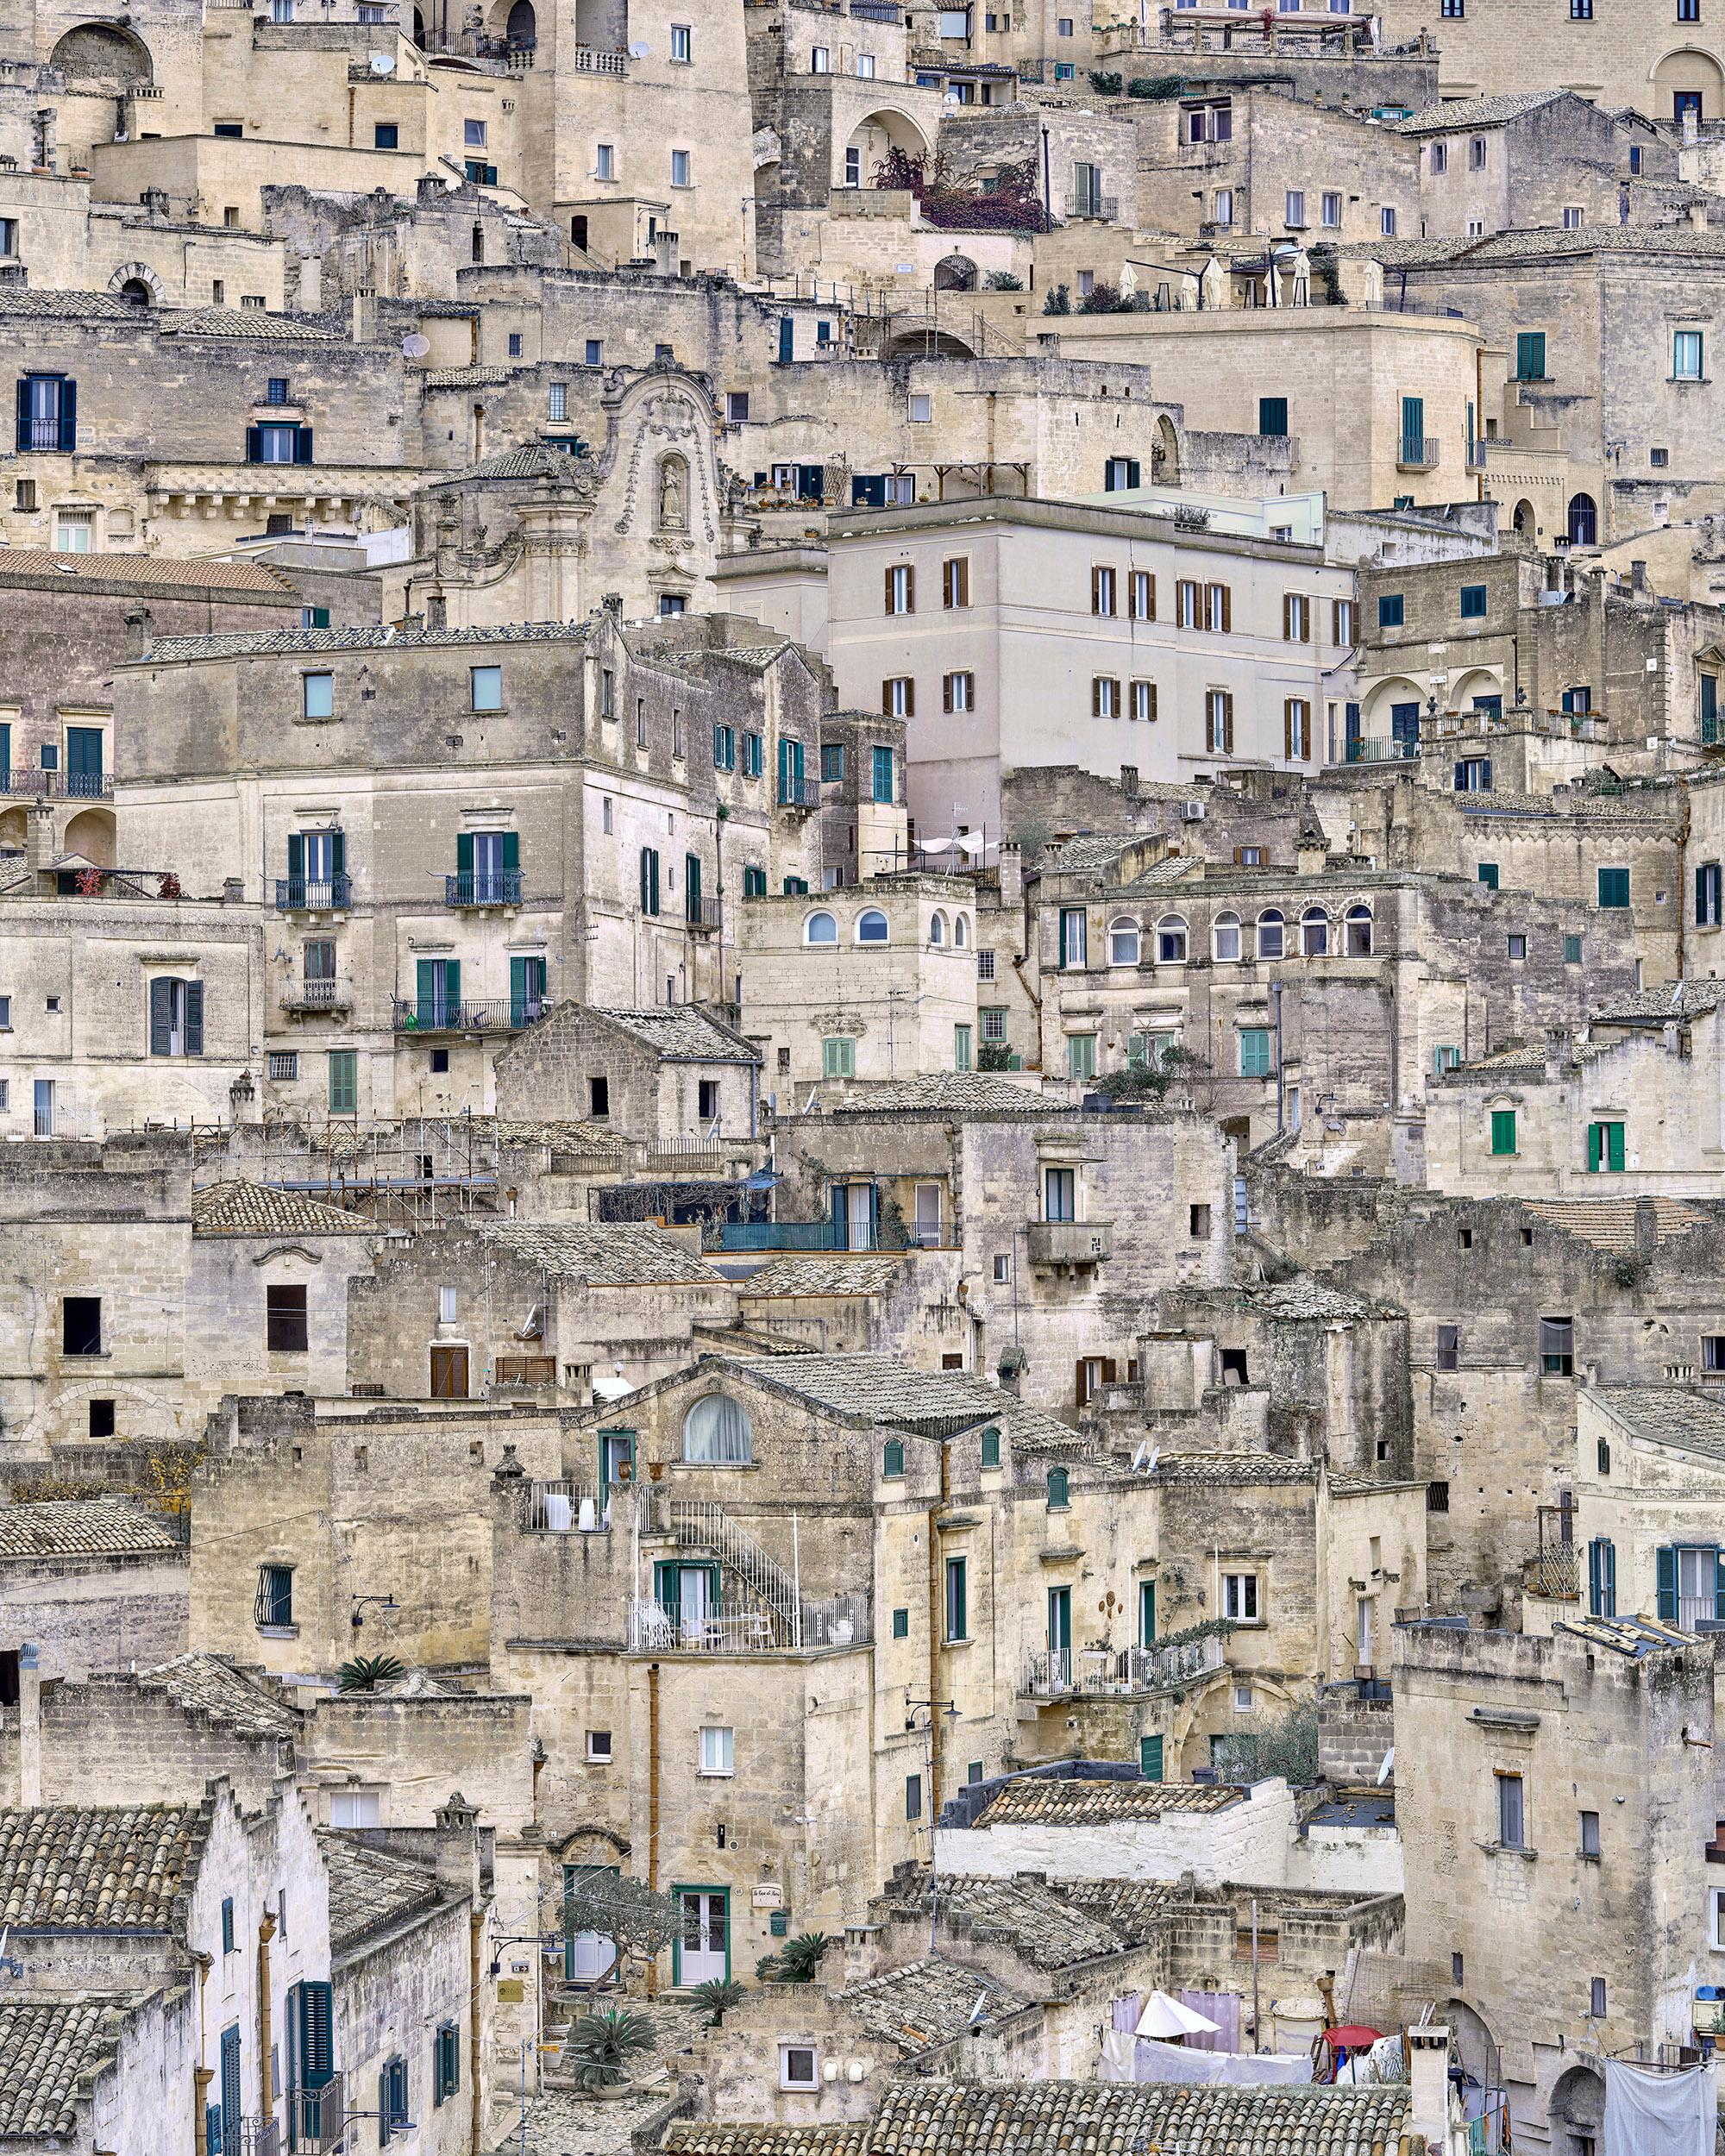 Basilicata, Italy

Available Sizes:
26 x 21 inches: Edition of 7
40 x 32 inches: Edition of 7
55 x 44 inches: Edition of 10
73.5 x 59 inches: Edition of 5

David Burdeny (b. 1968. Winnipeg, Canada) graduated with a Masters in Architecture and